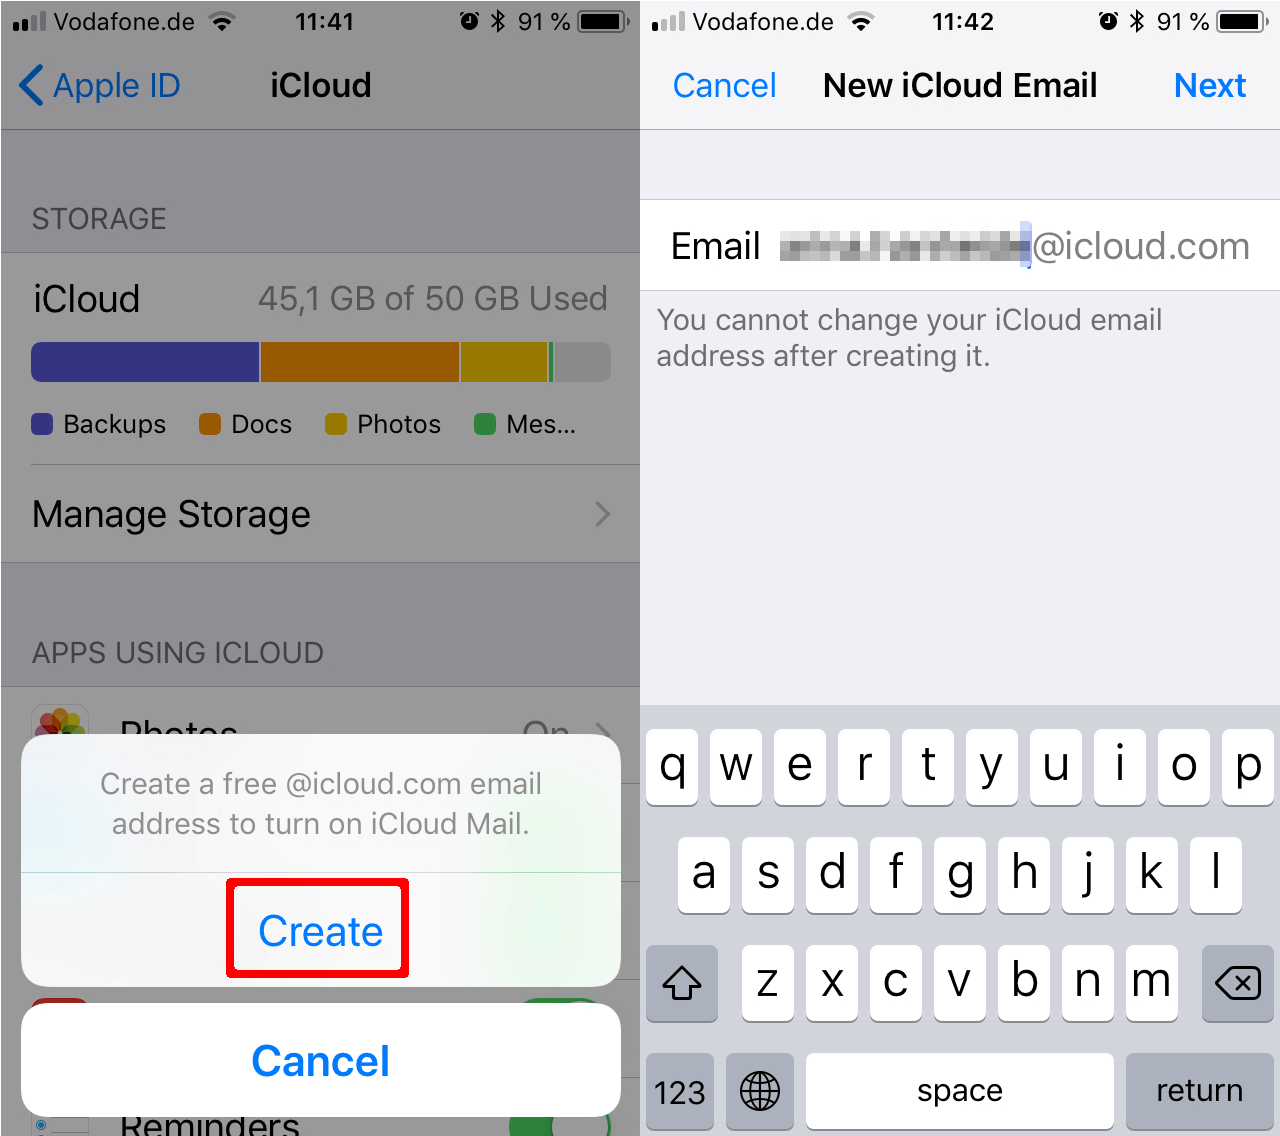 what is my icloud email address used for